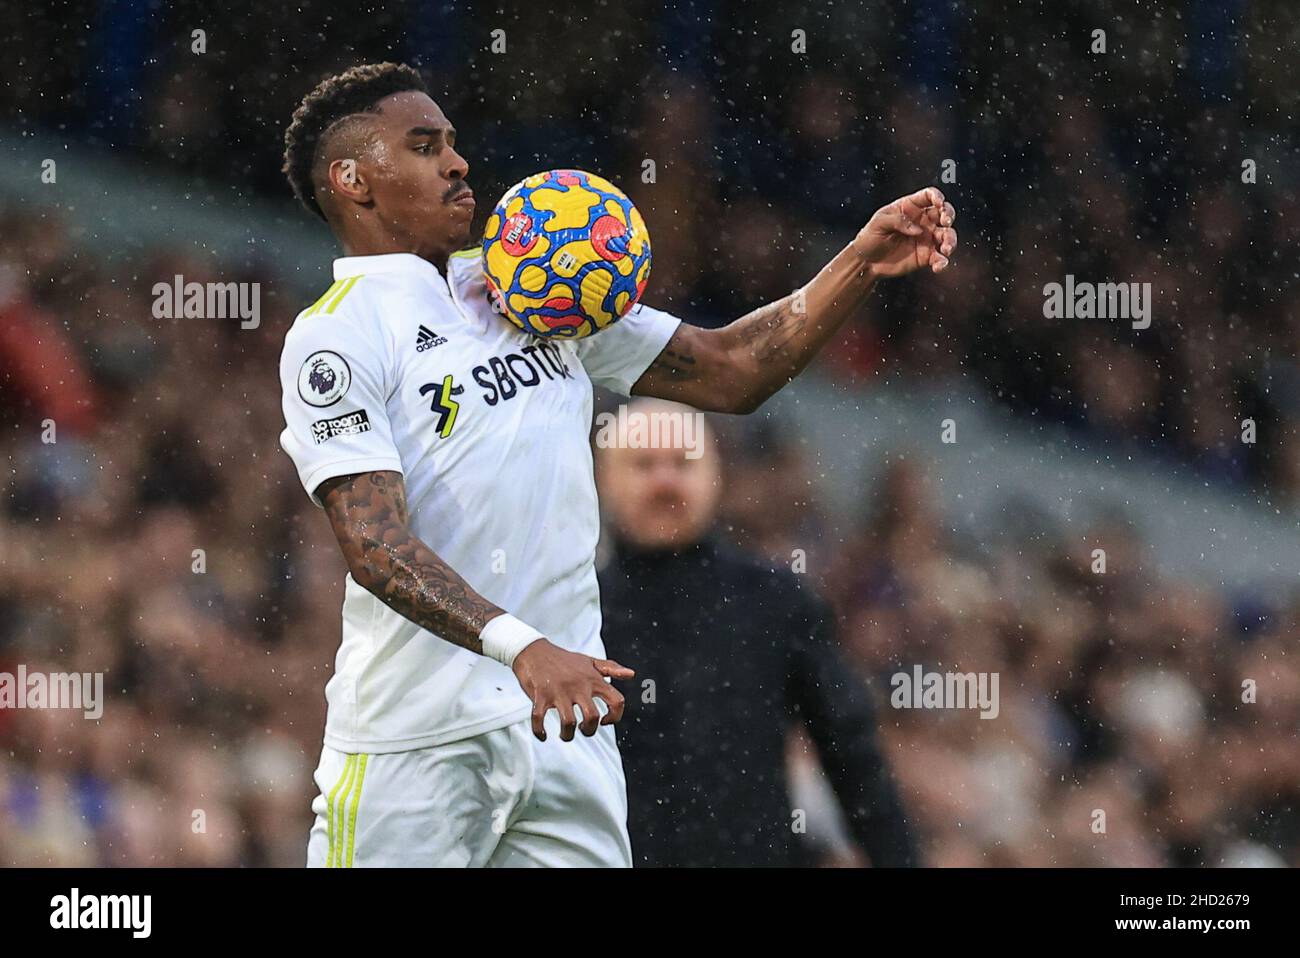 Junior Firpo #3 of Leeds United controls the ball  in Leeds, United Kingdom on 1/2/2022. (Photo by Mark Cosgrove/News Images/Sipa USA) Stock Photo